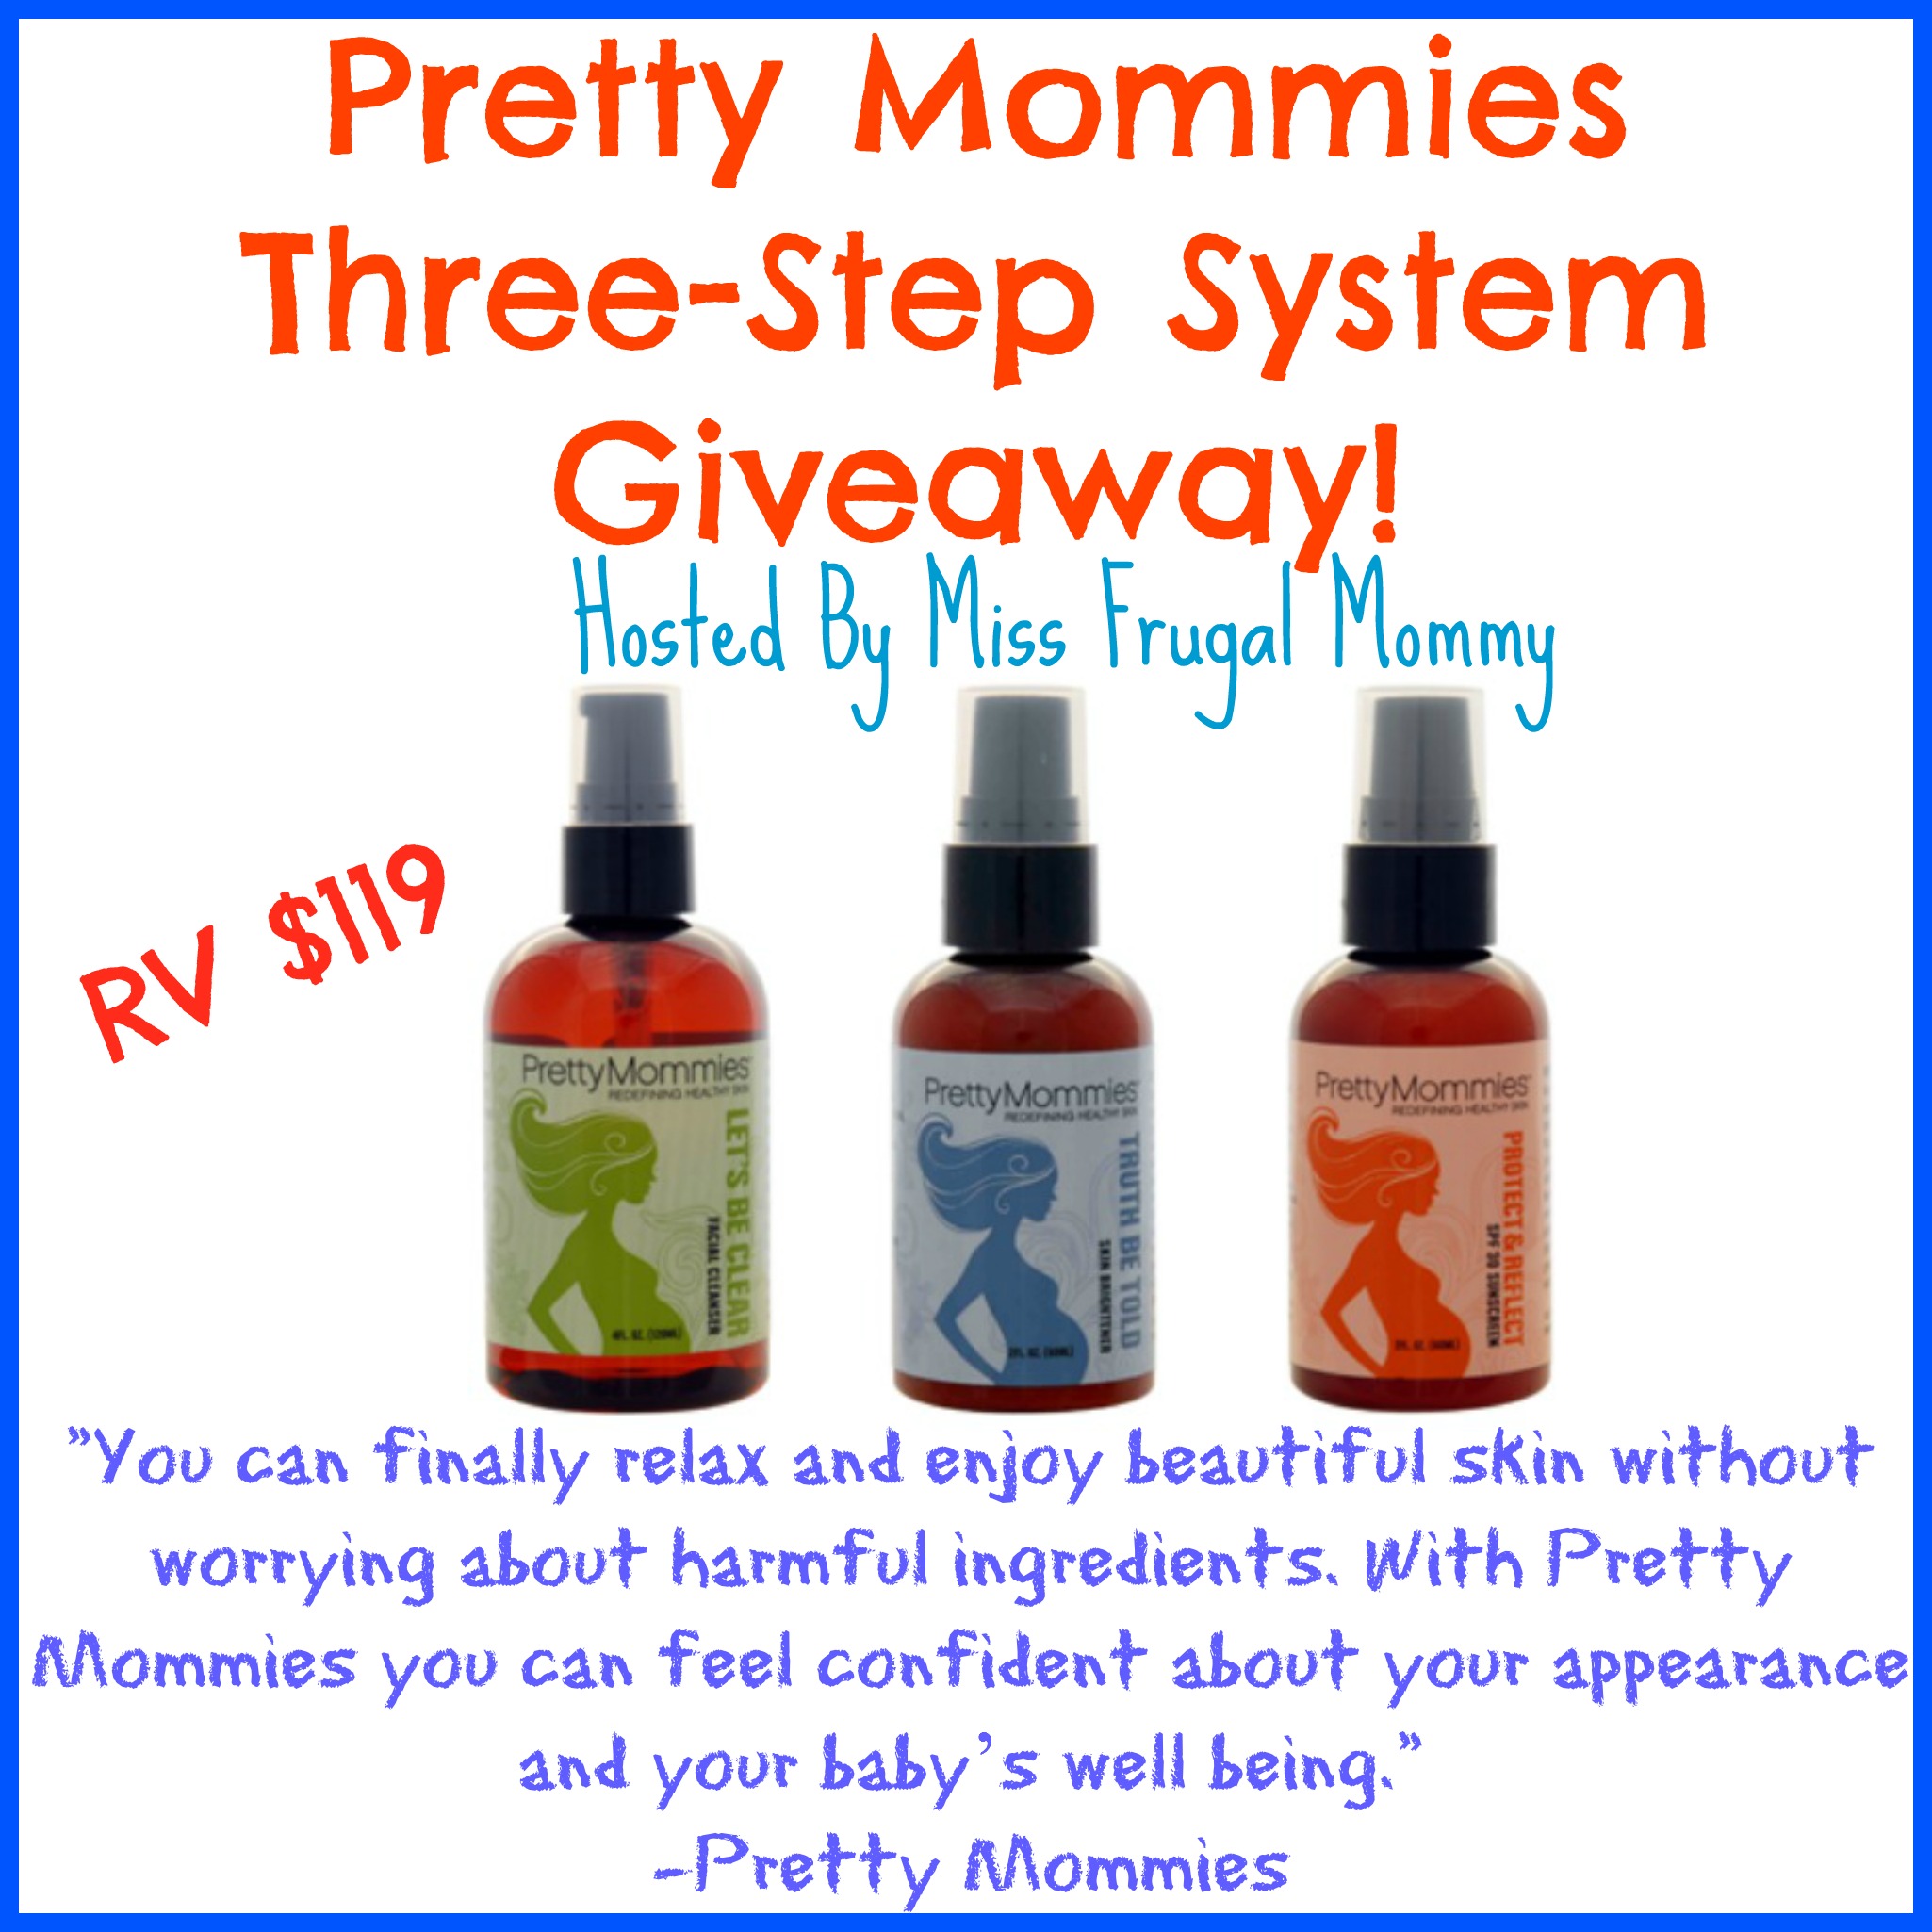 Pretty Mommies Skincare 3 Step System Giveaway